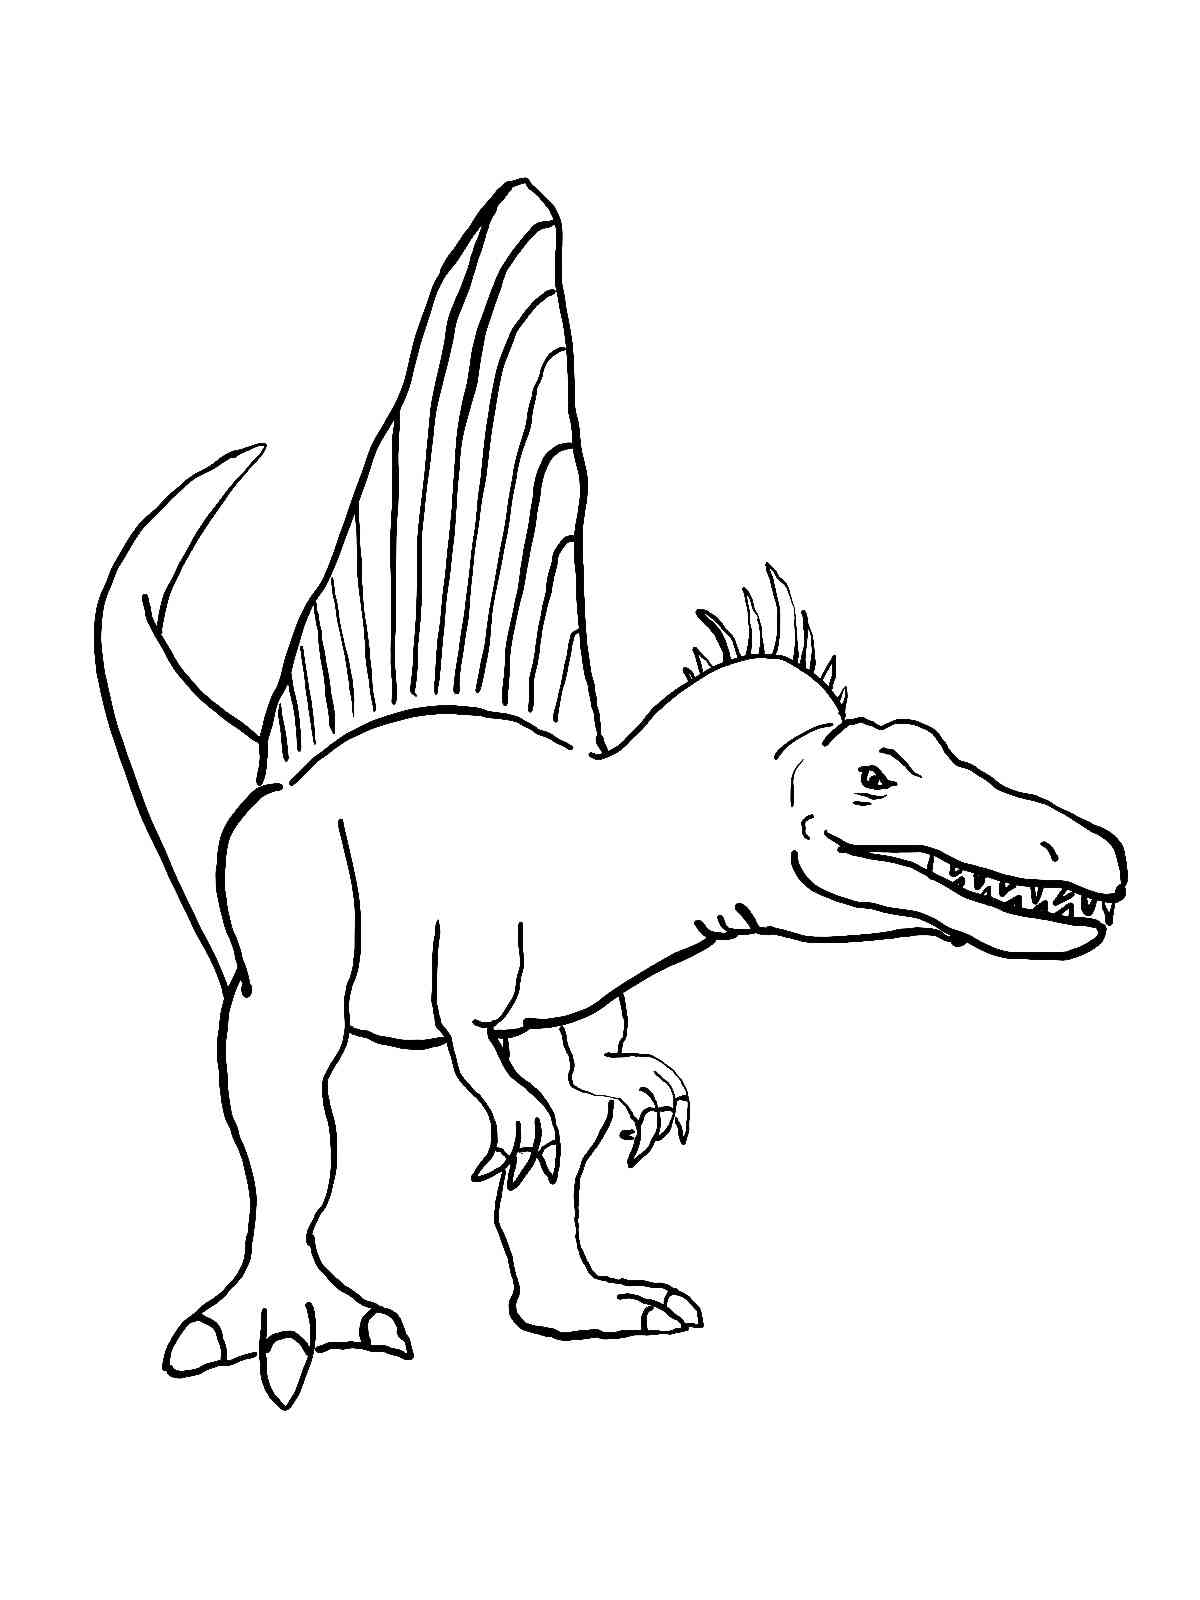 Fierce Spinosaurus coloring page